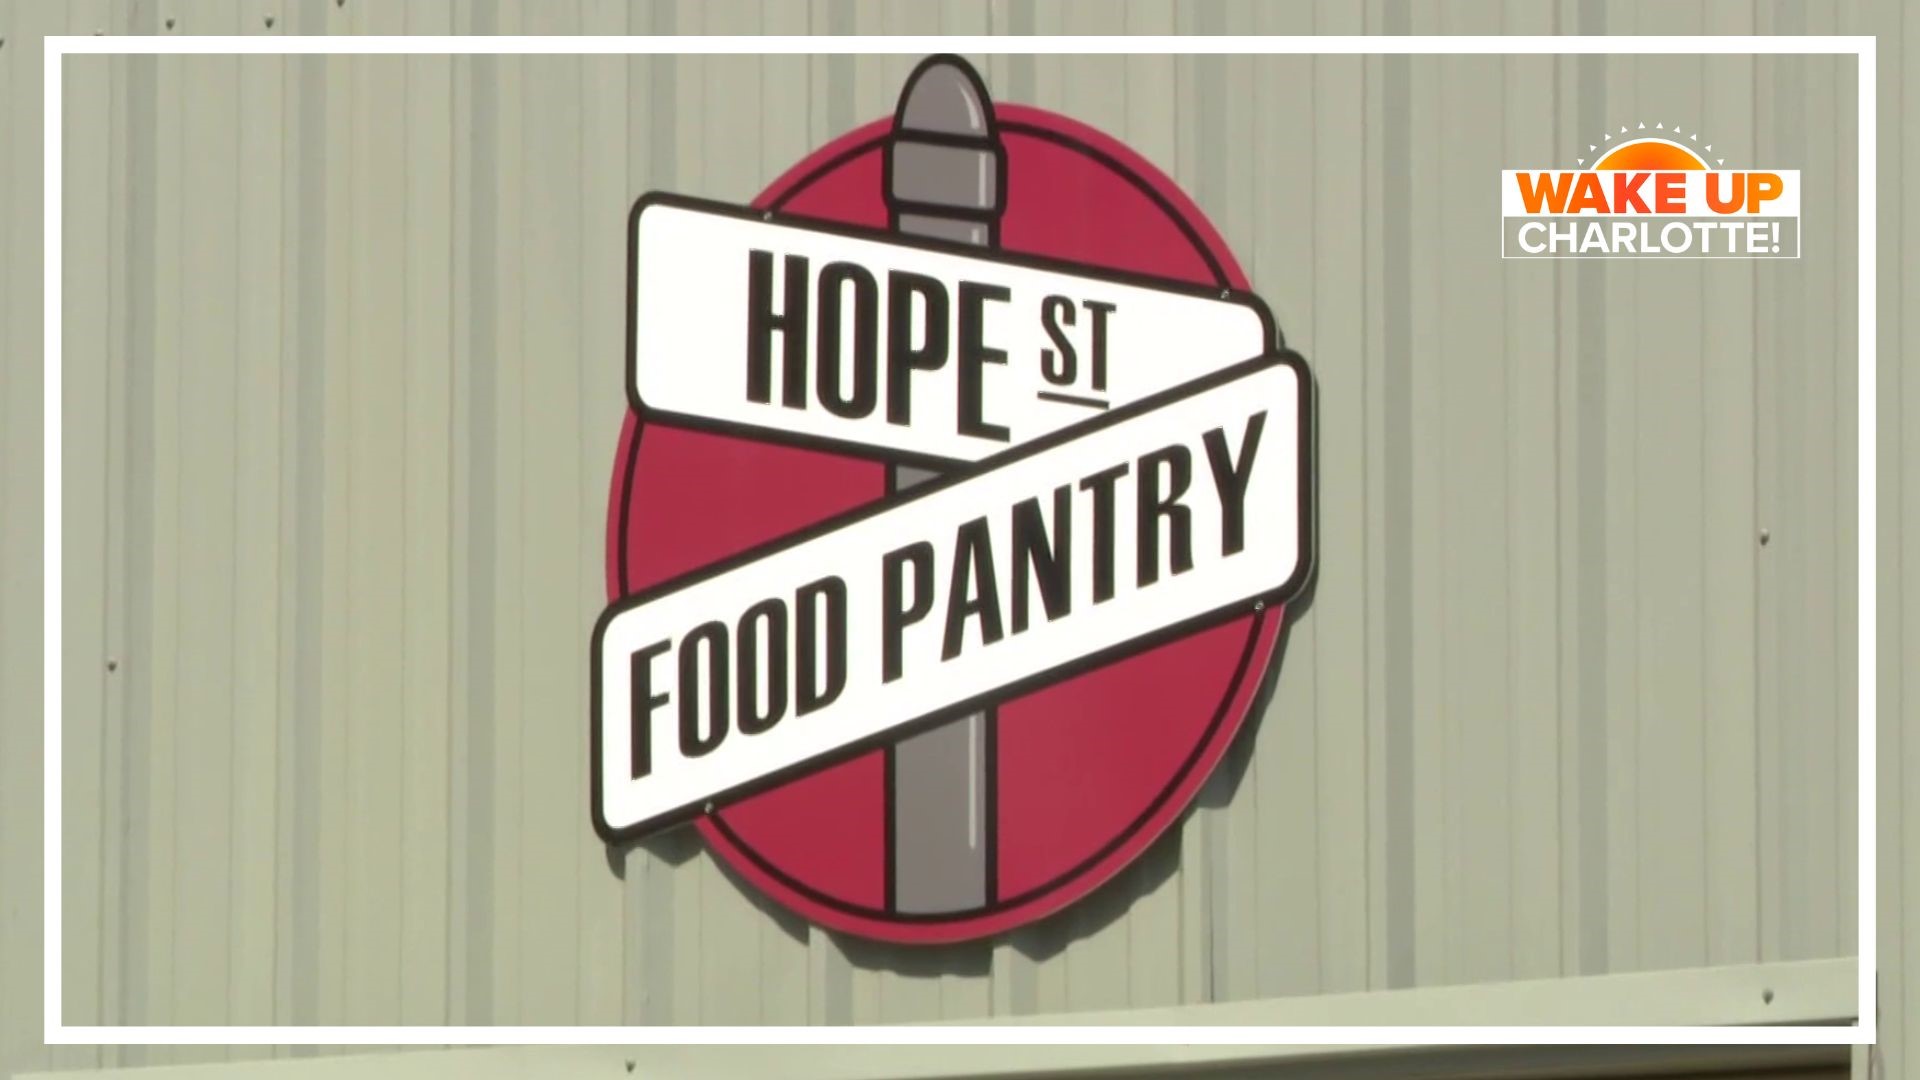 For years, Hope Street Food Pantry has made a difference in north Charlotte by providing much-needed meals to neighbors in need.